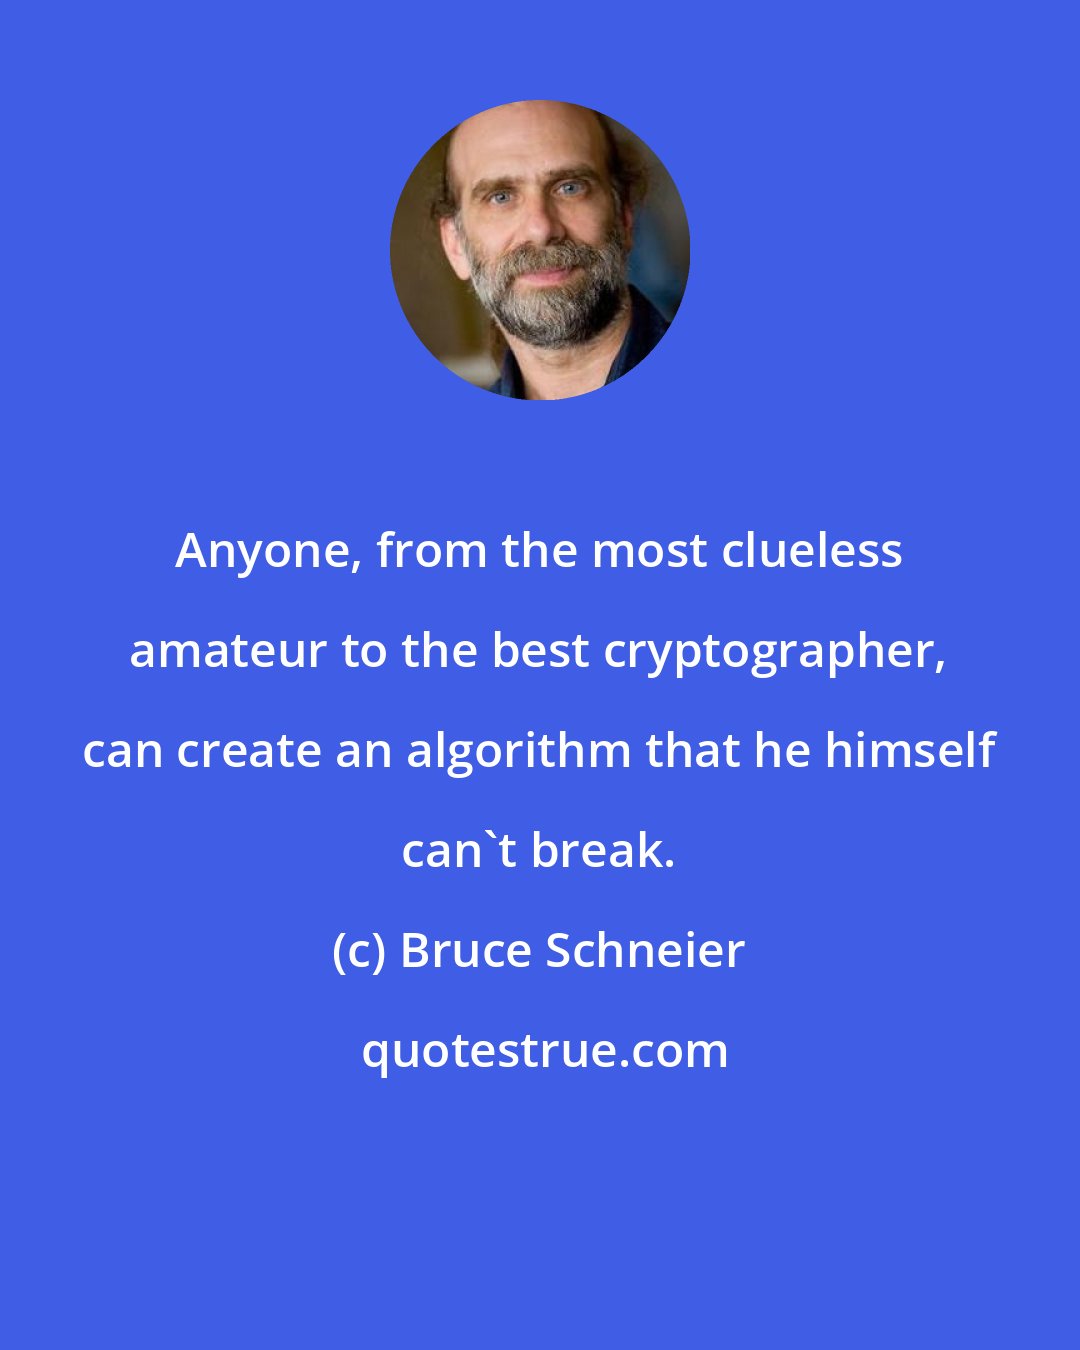 Bruce Schneier: Anyone, from the most clueless amateur to the best cryptographer, can create an algorithm that he himself can't break.